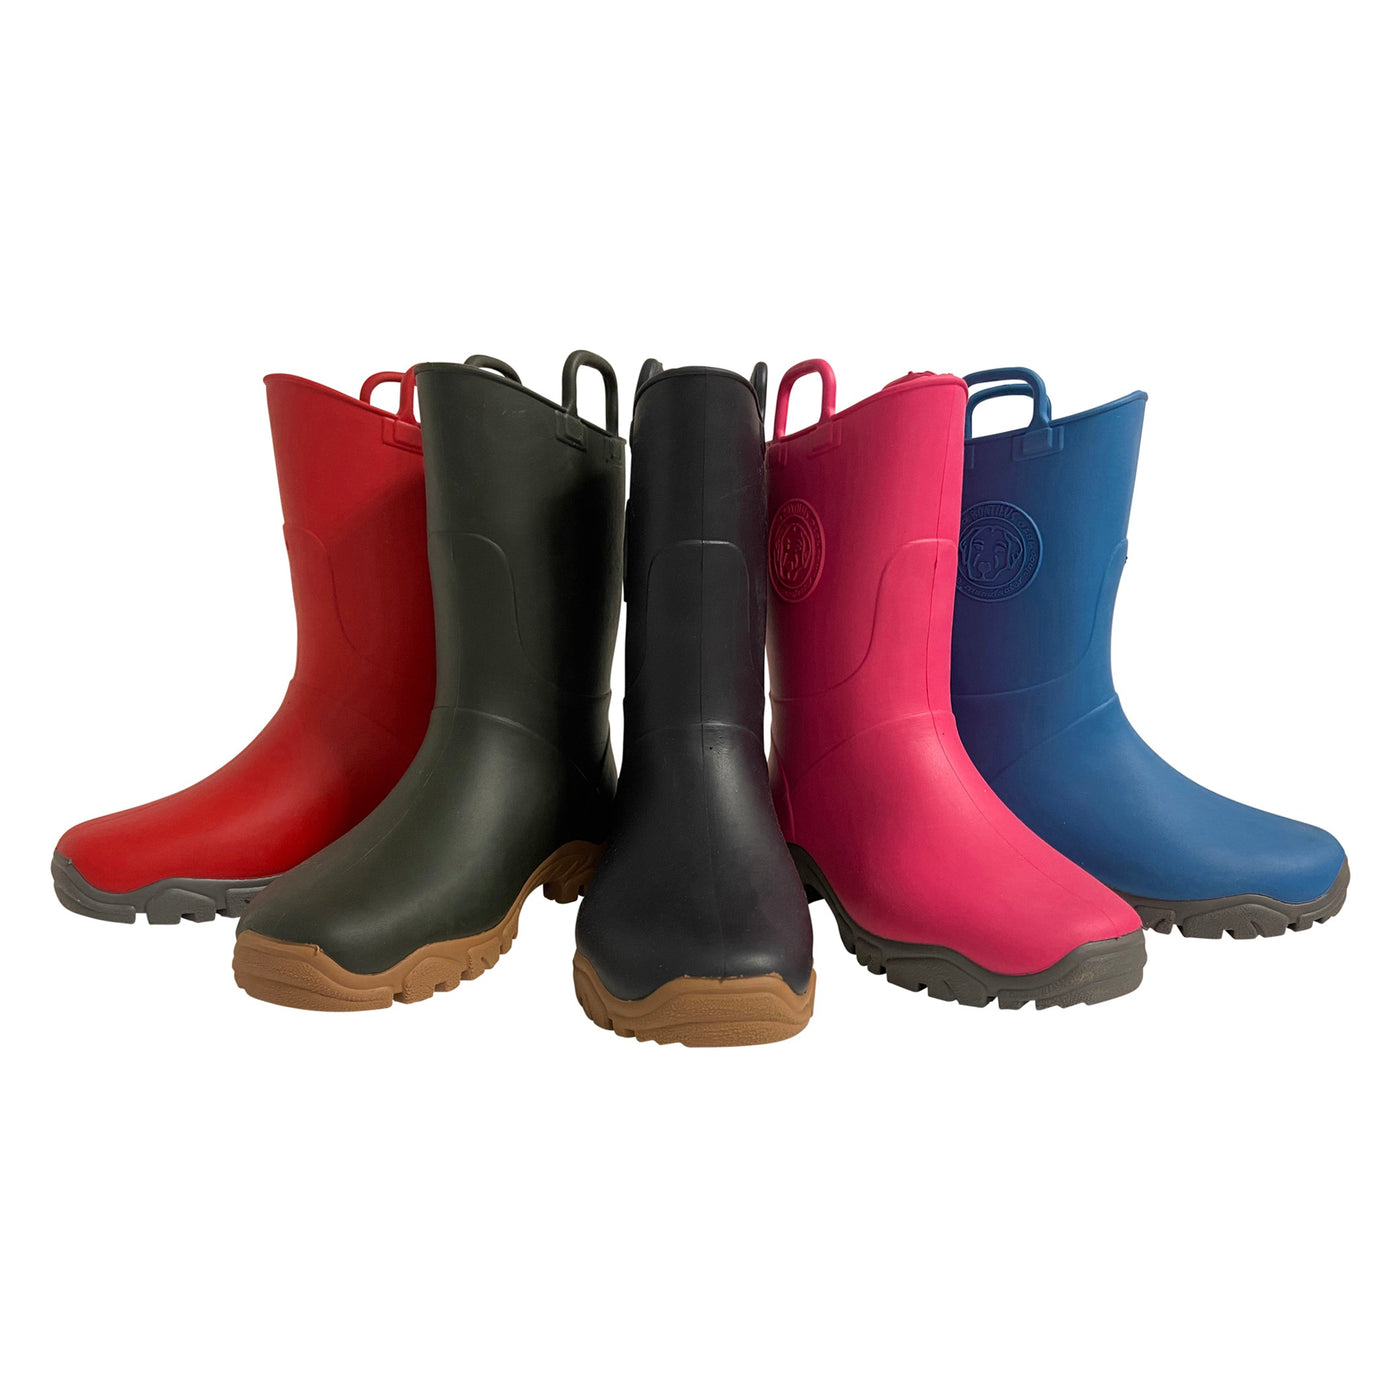 Boatilus Ducky Welly Boot Red/Grey